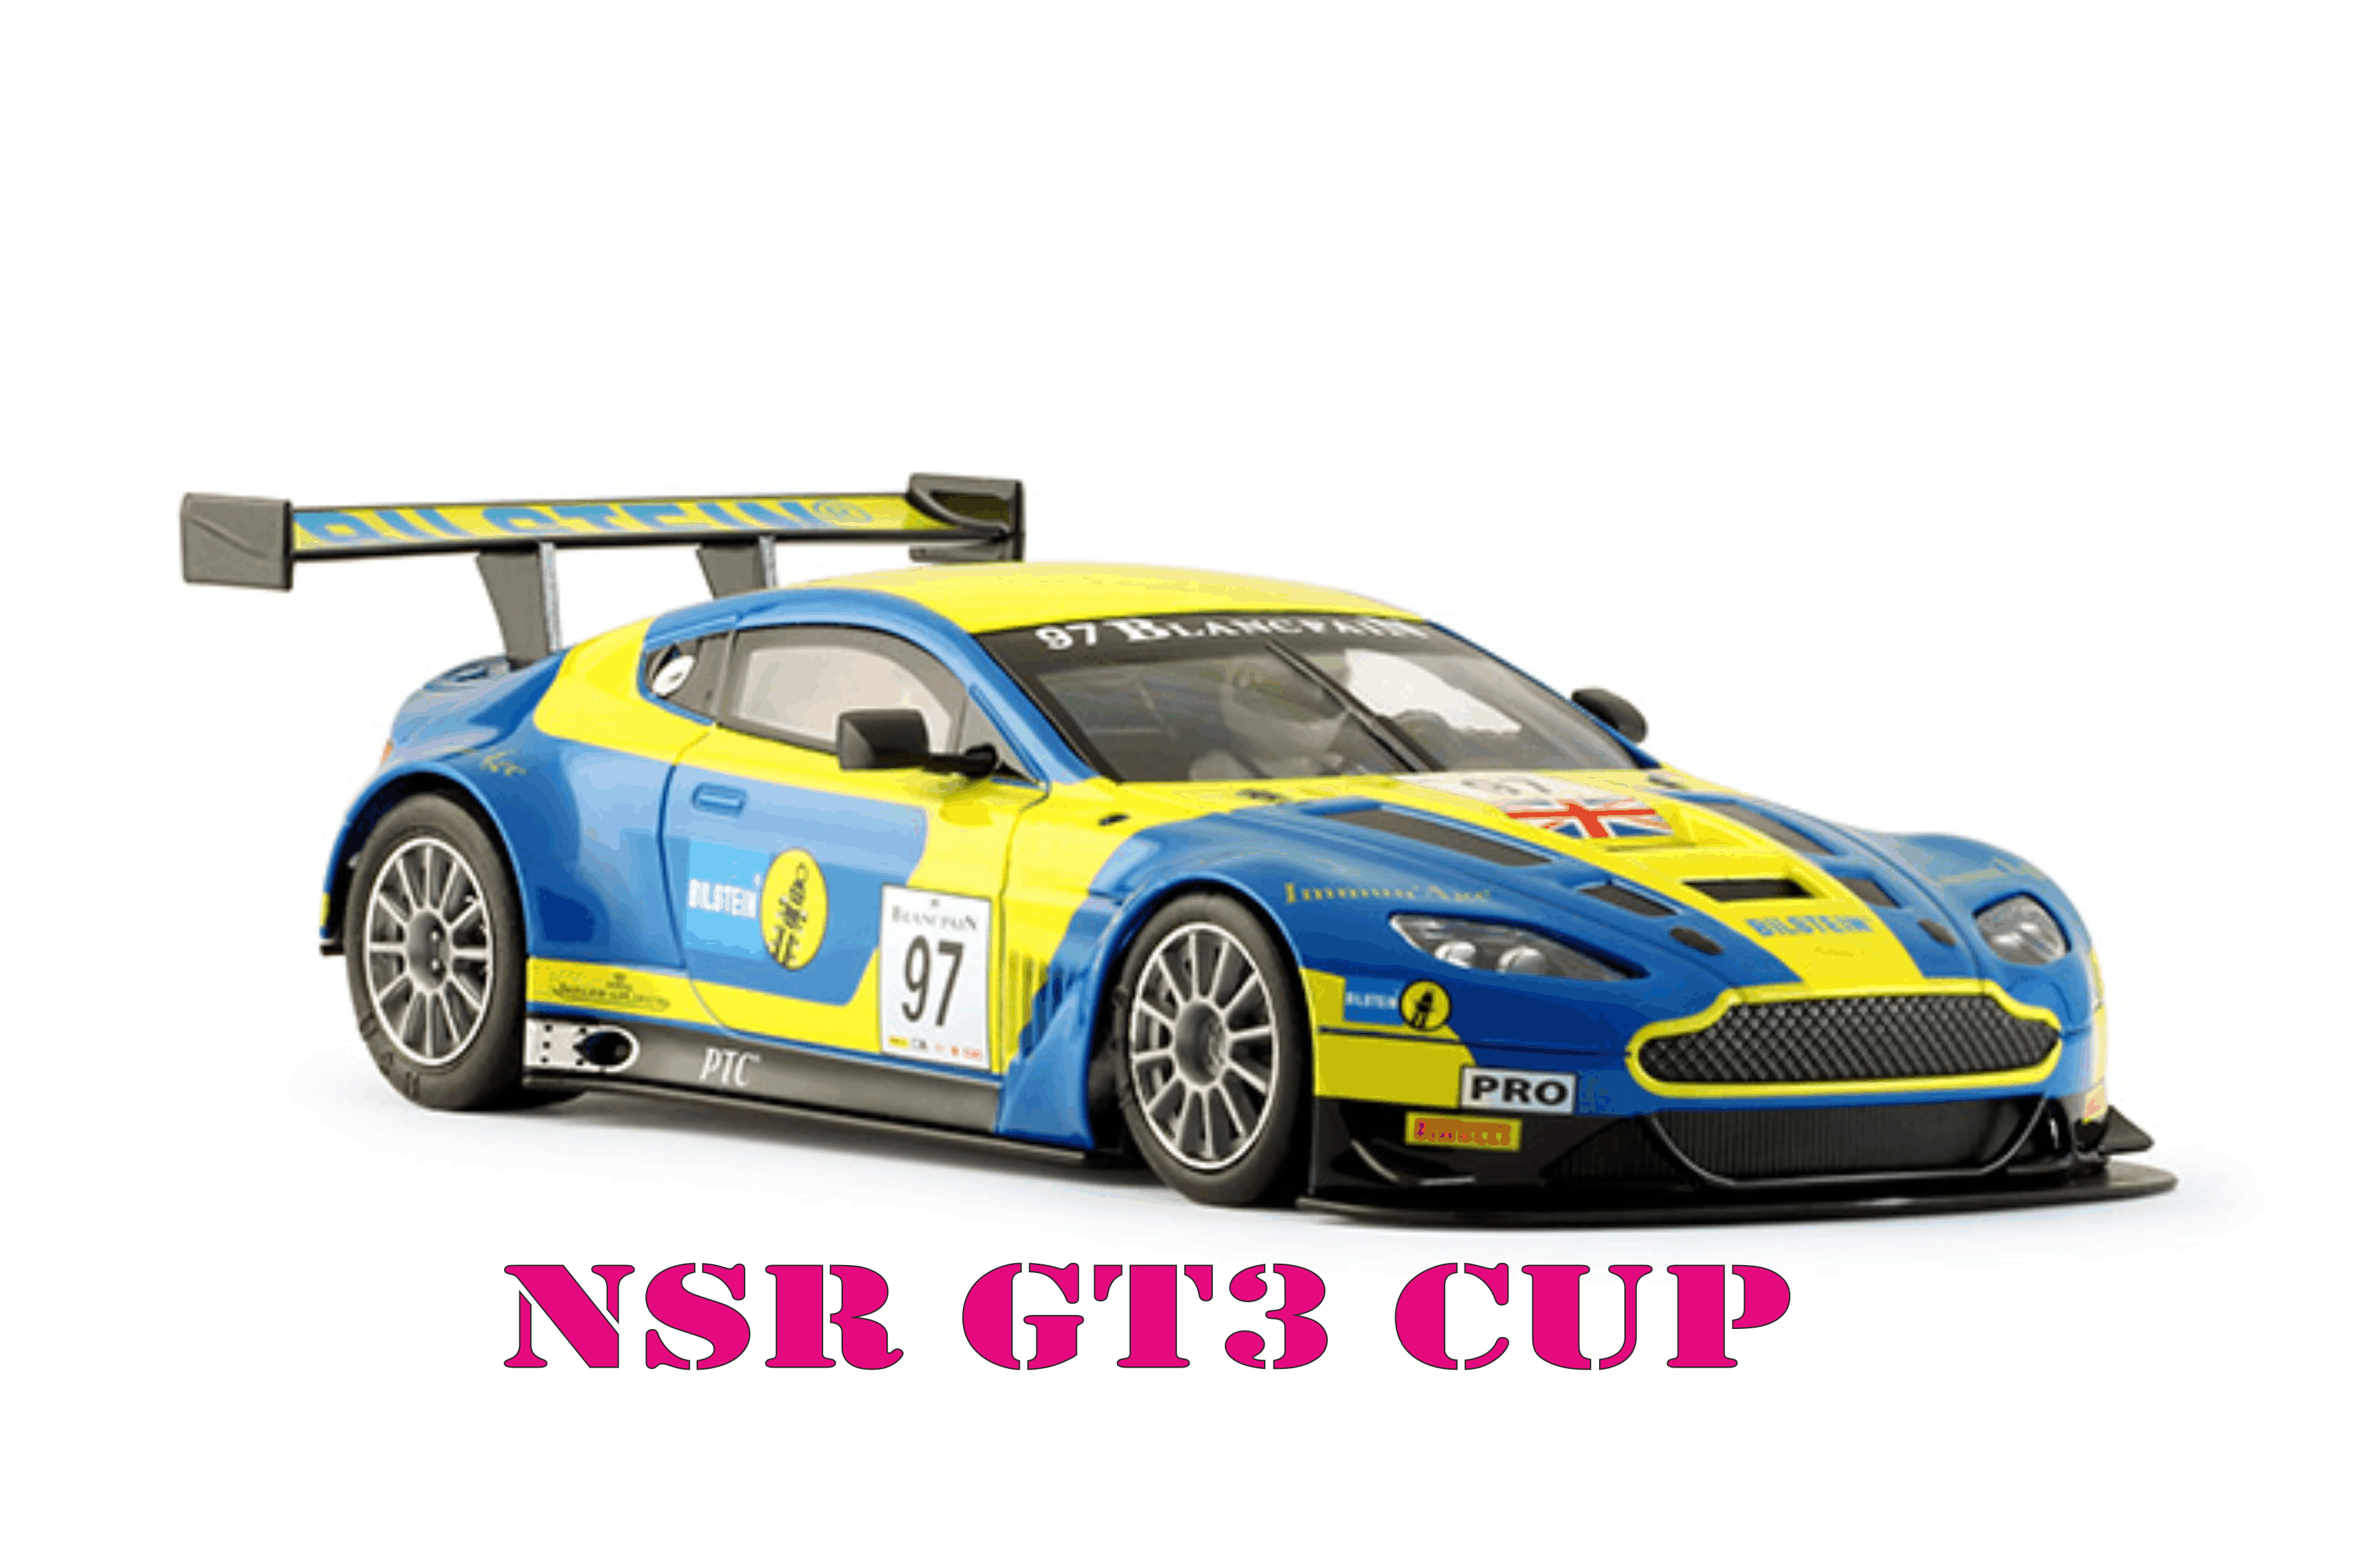 NSR GT3 CUP